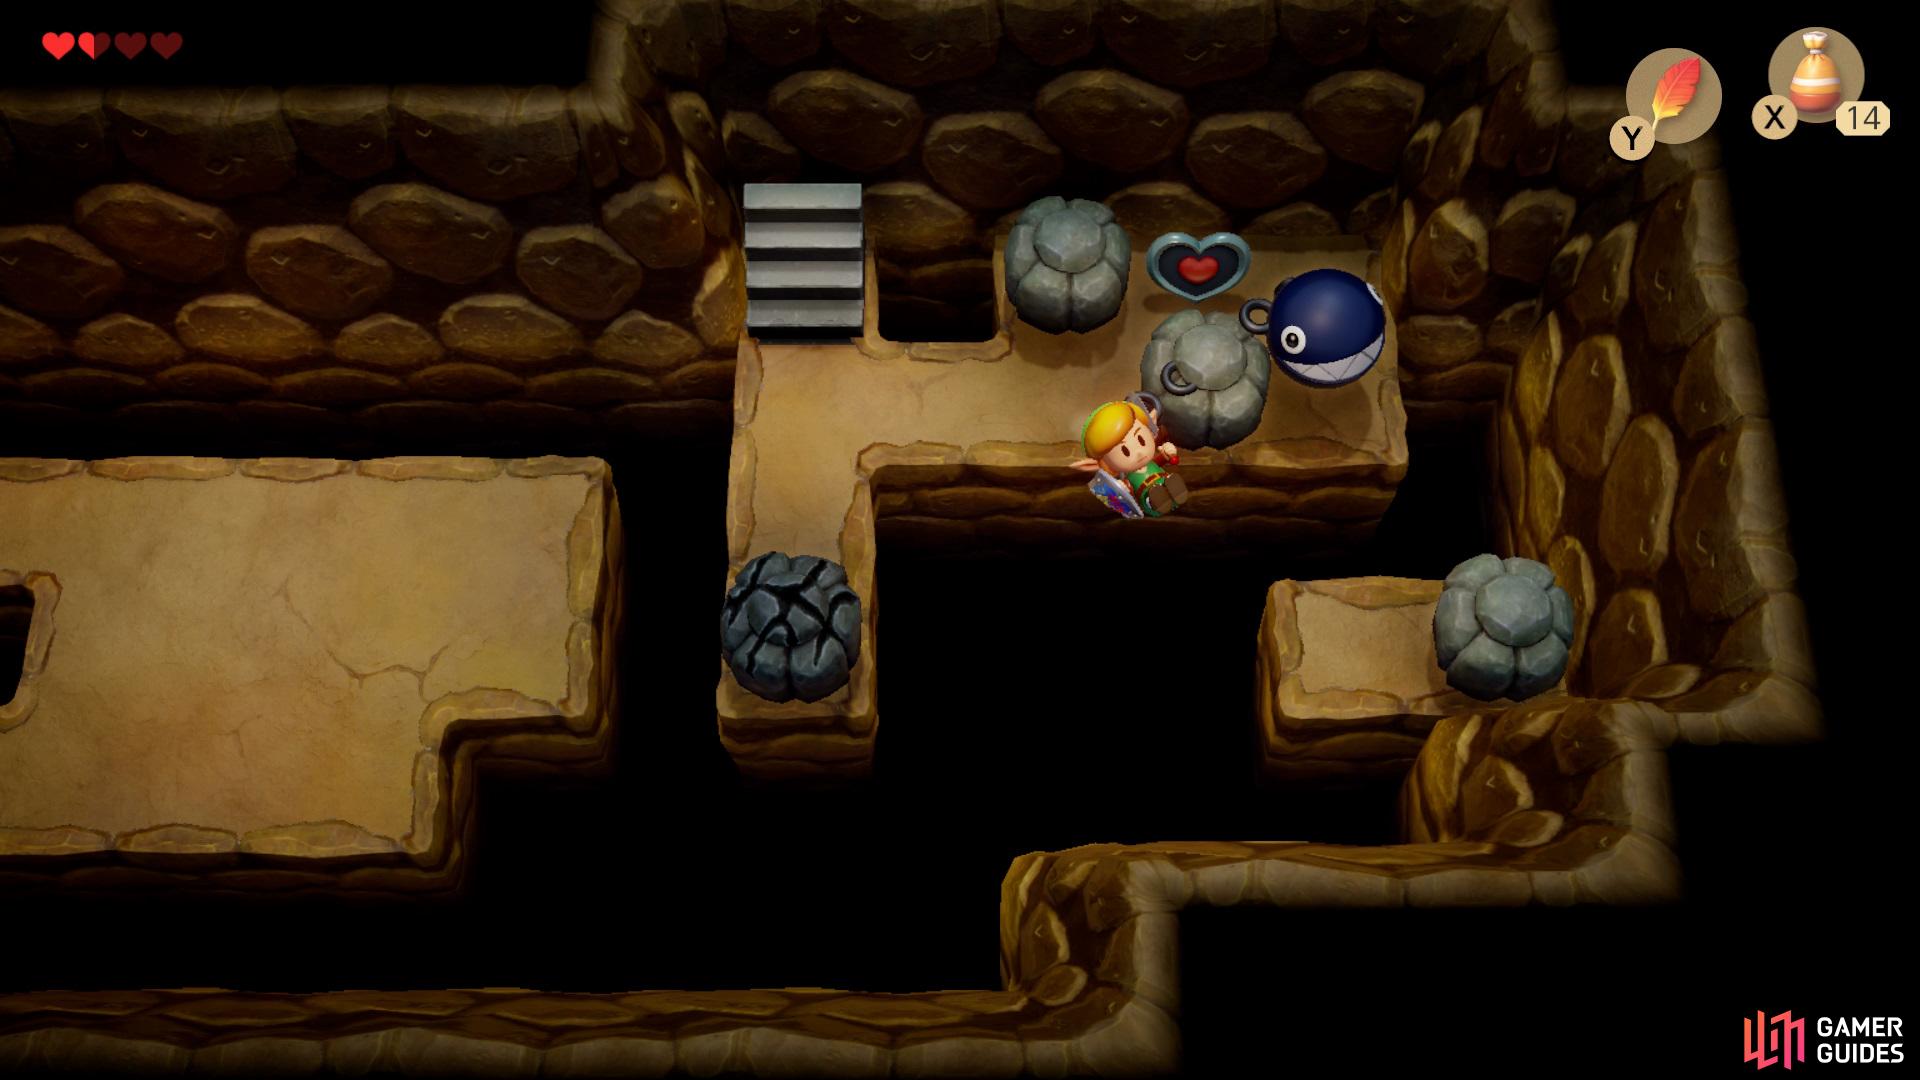 proceed down into the secret room and push the stone to your right to allow diagonally hop over to the platform, 